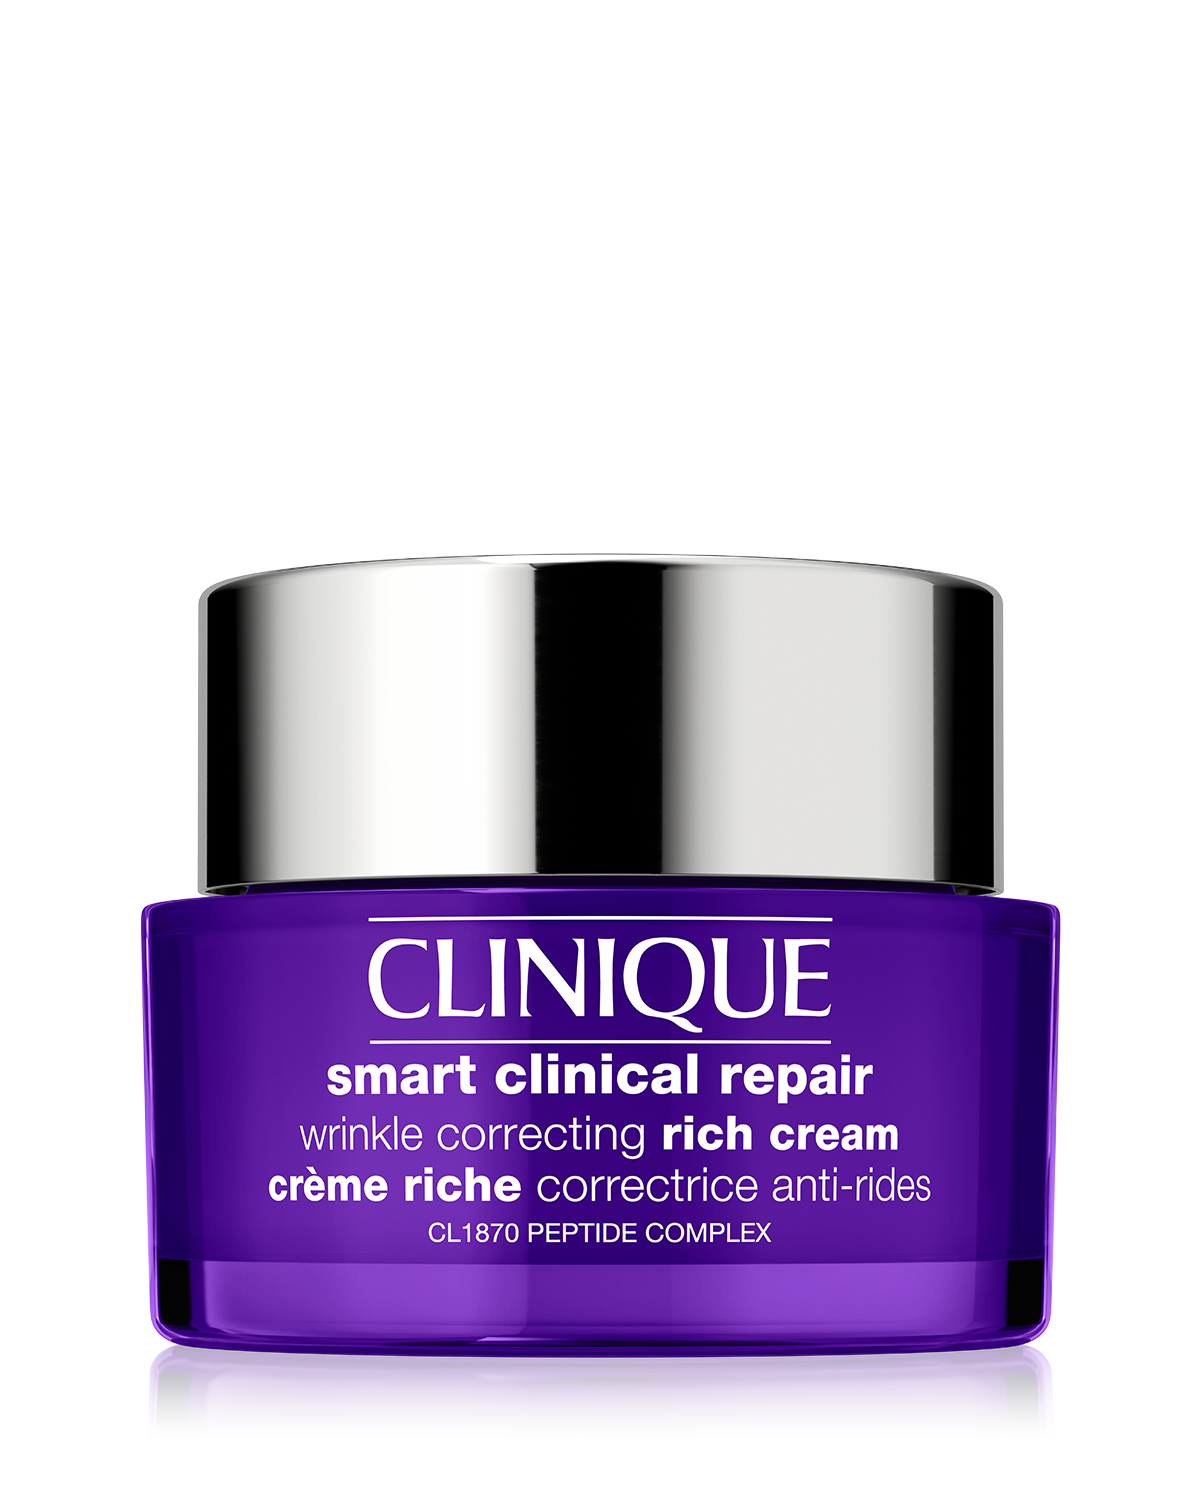 NEW Clinique Smart Clinical Repair™ Wrinkle Correcting Rich Cream